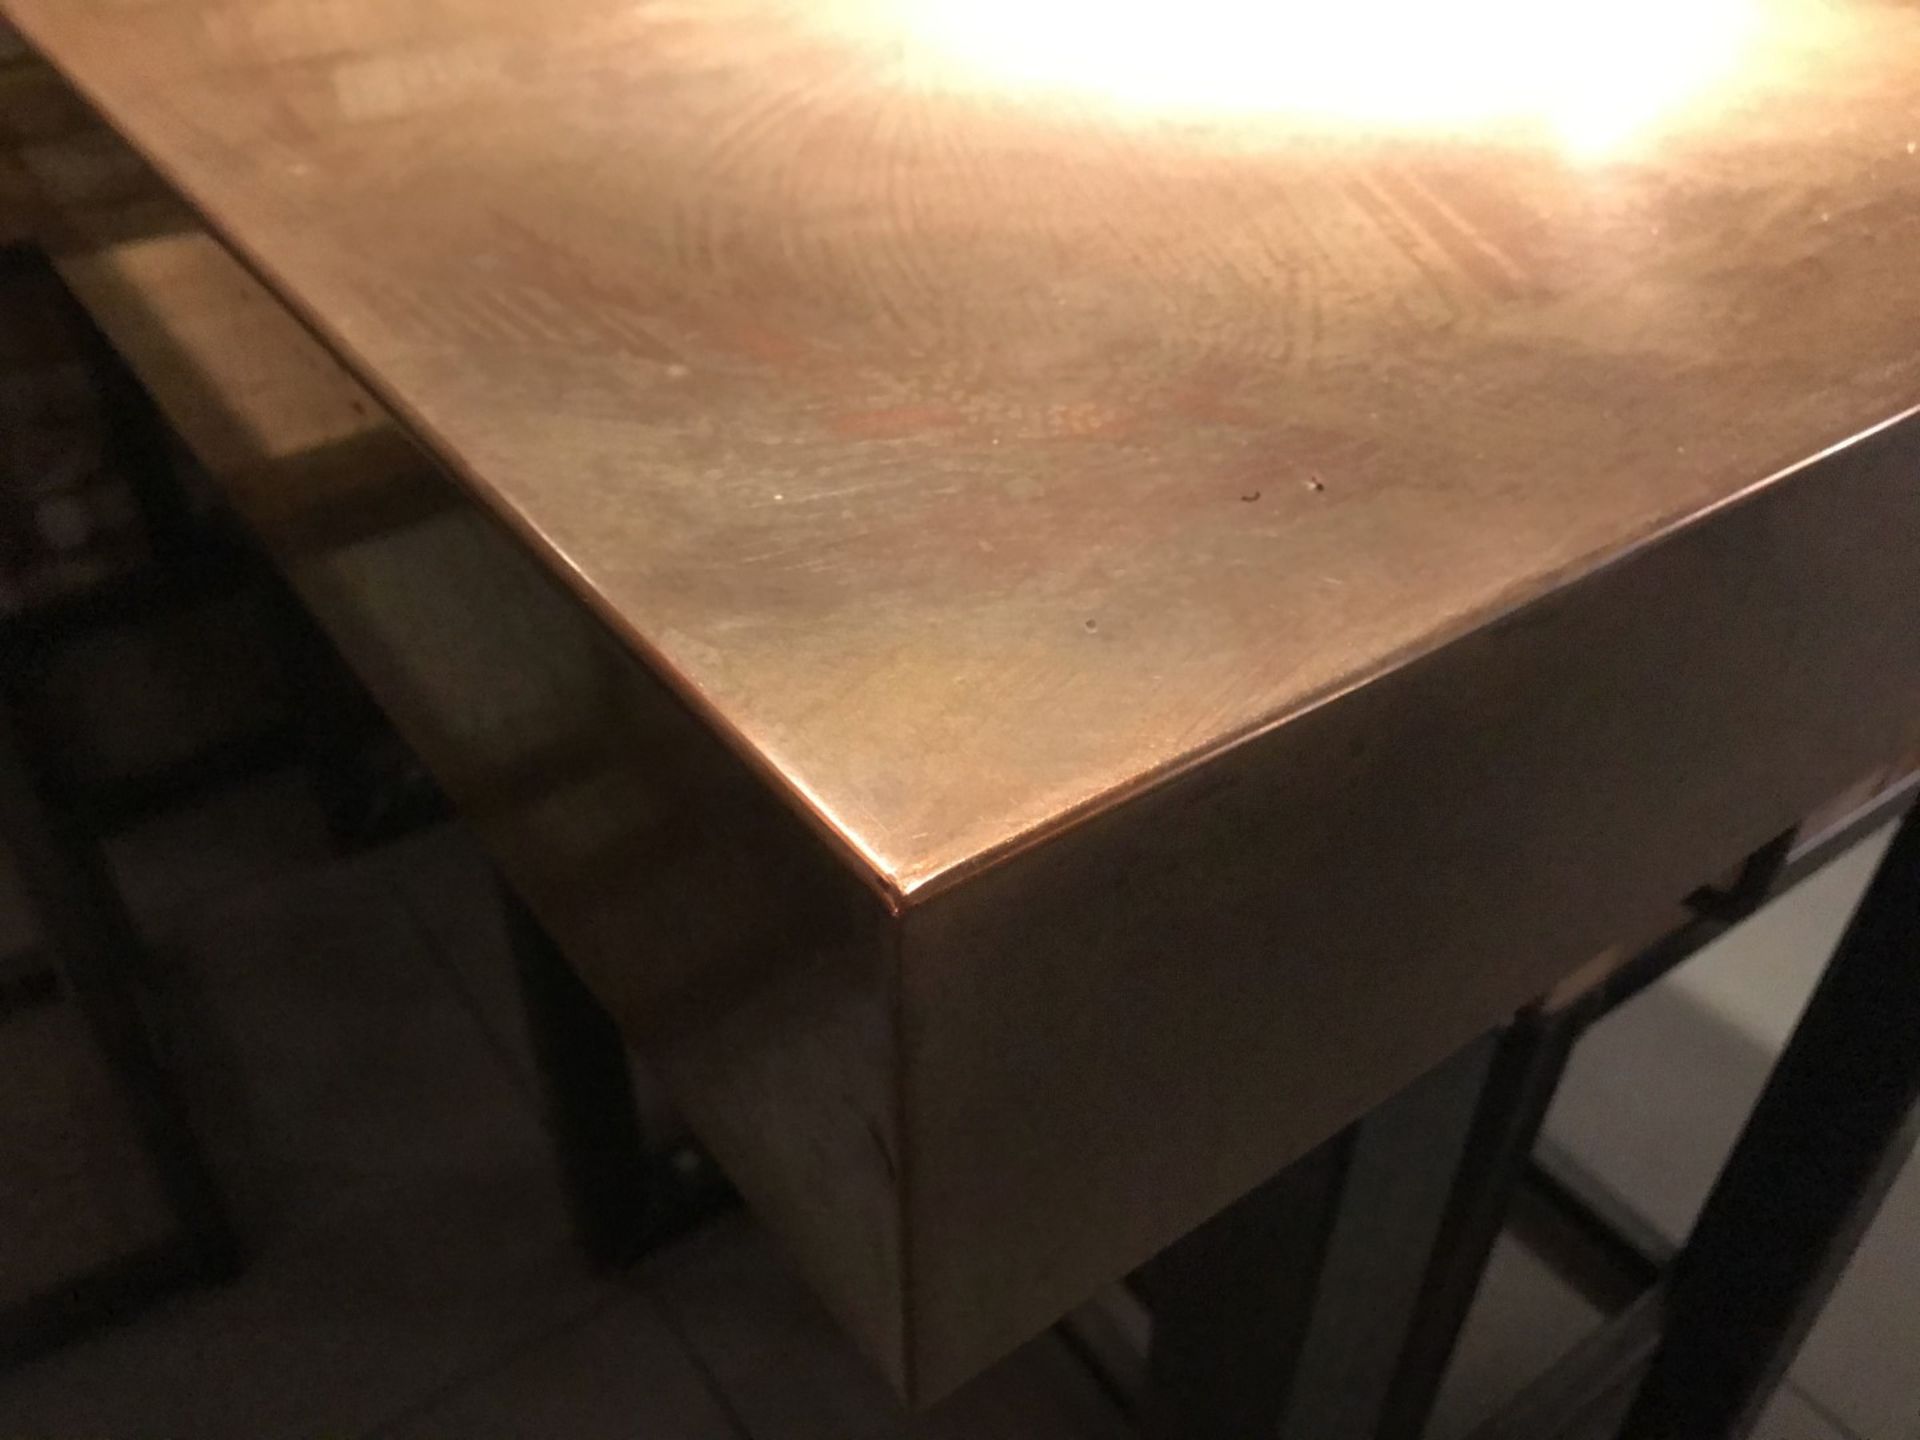 1 x Restaurant Dining Table With Industrial Metal Base and Copper Top - Size H91 x W180 x D70 - Image 7 of 7